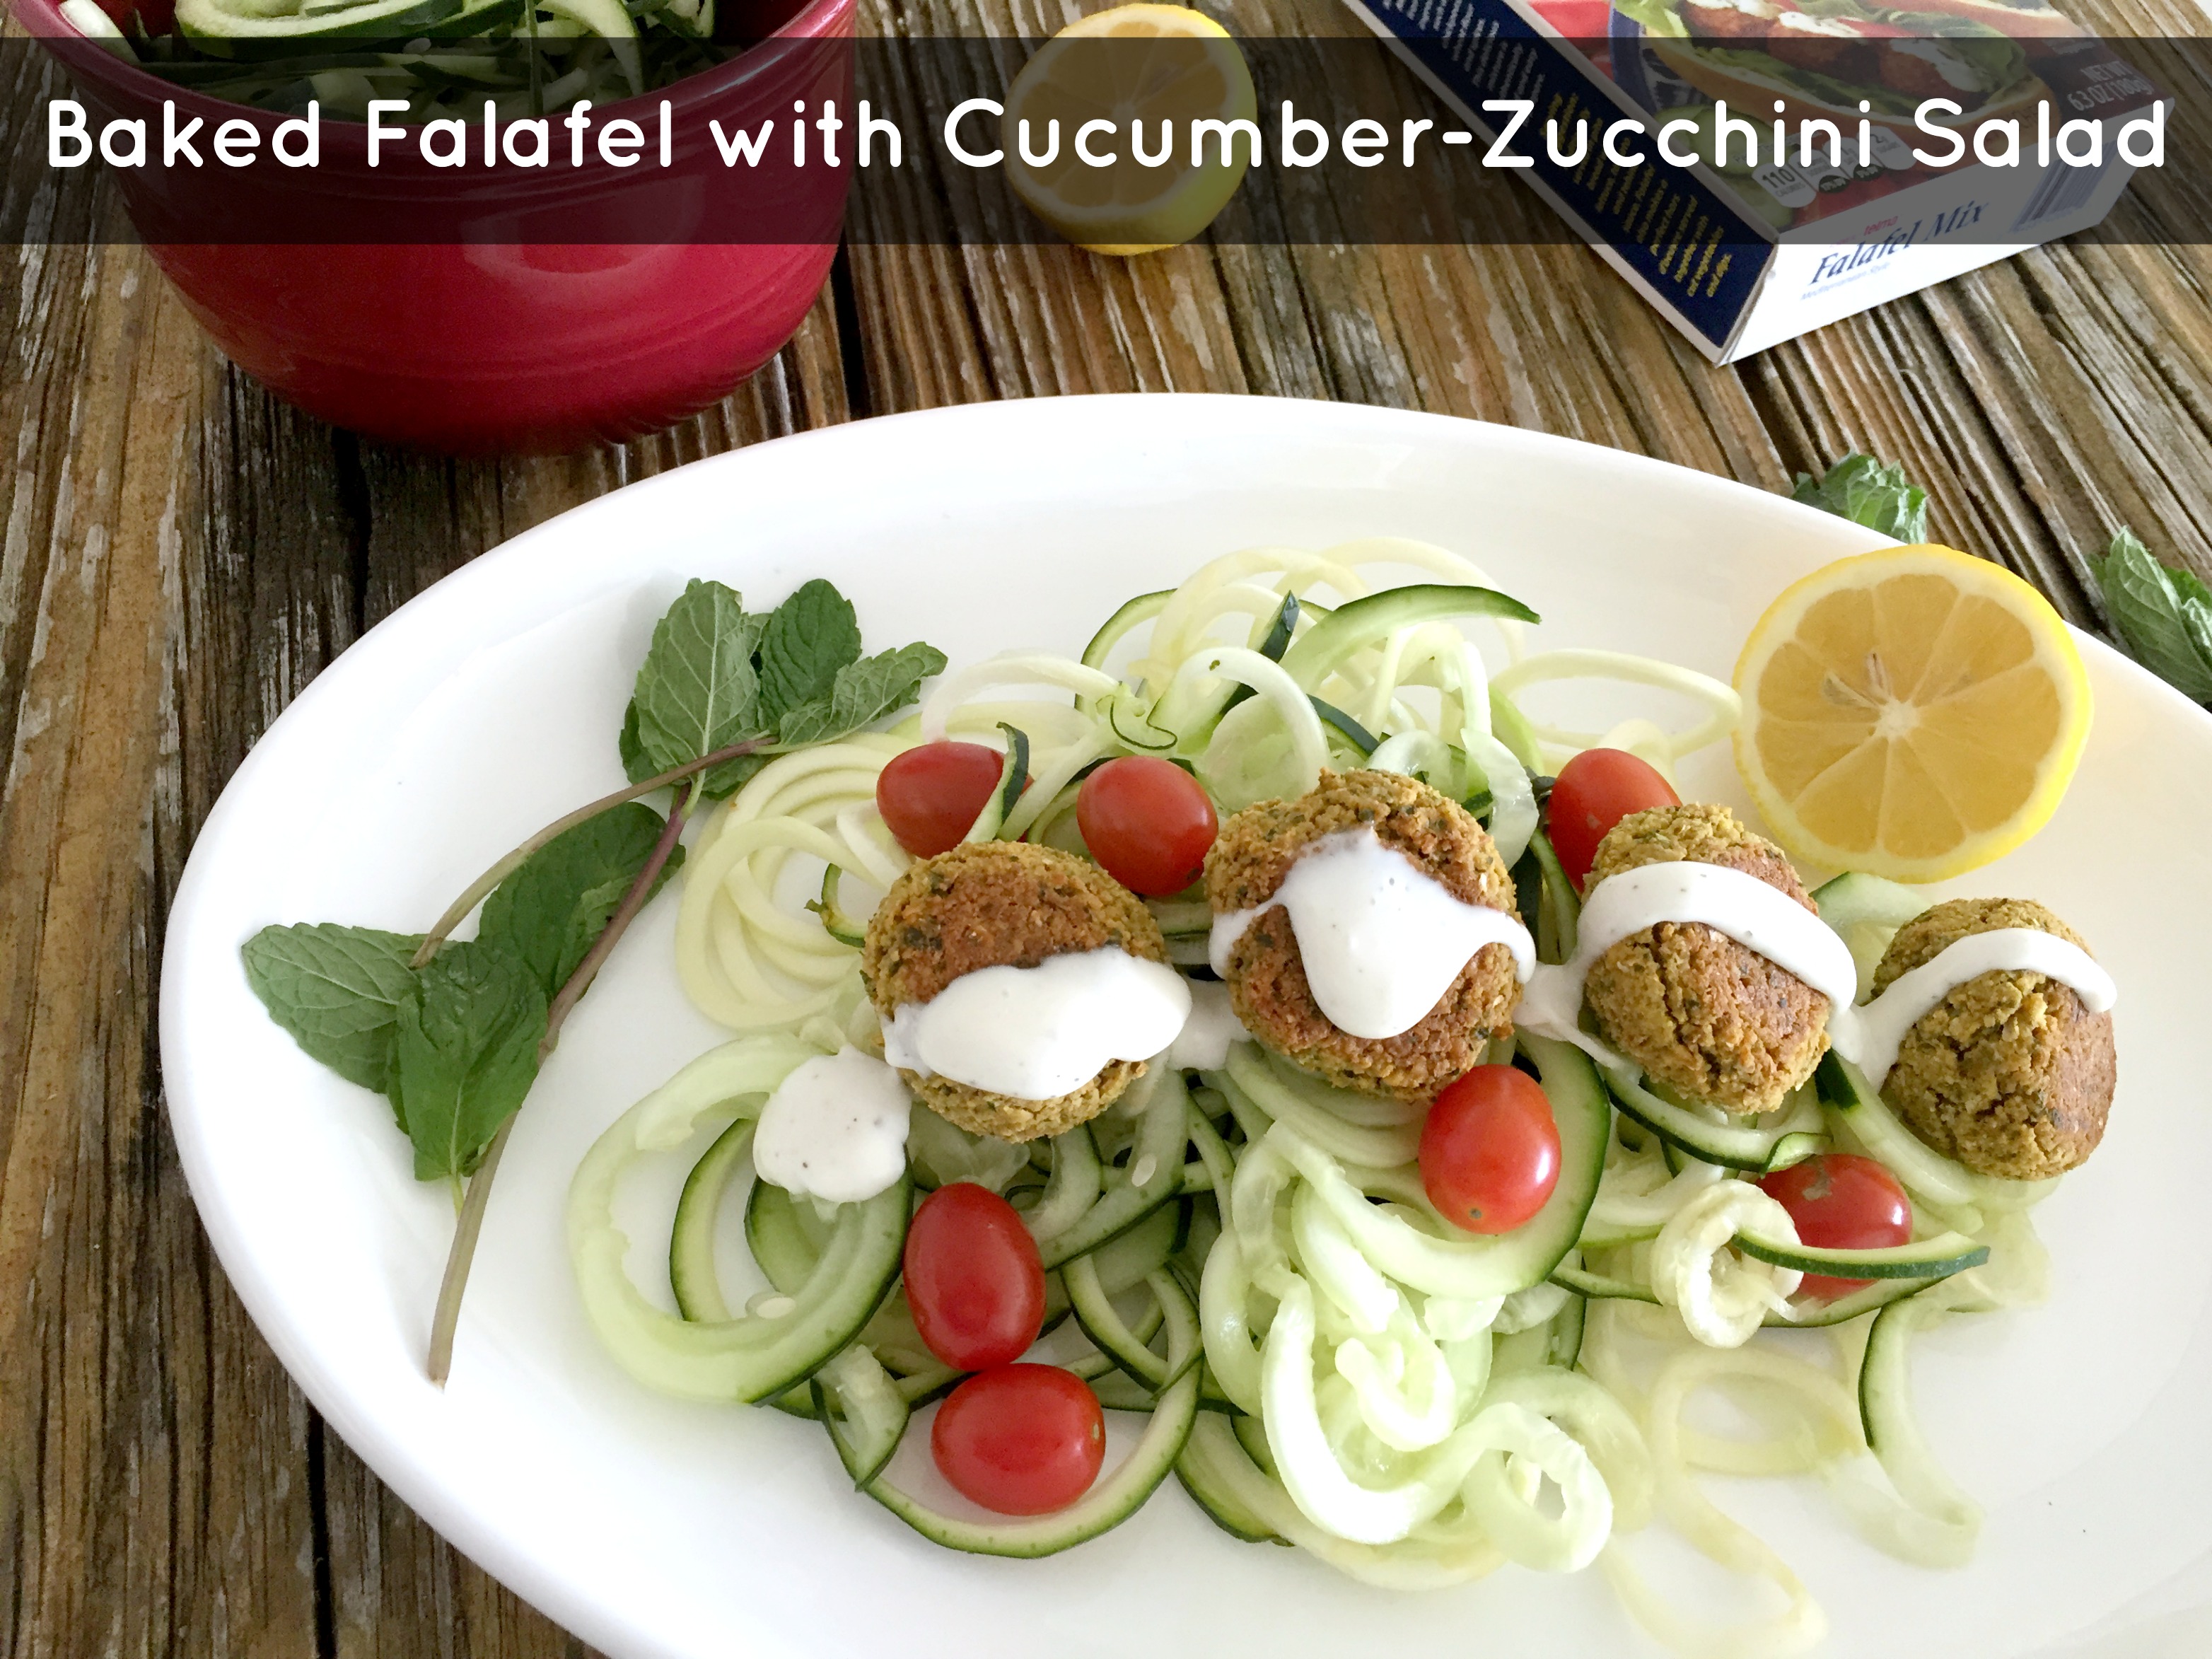 Baked falafel and cucumber-zucchini noodle salad